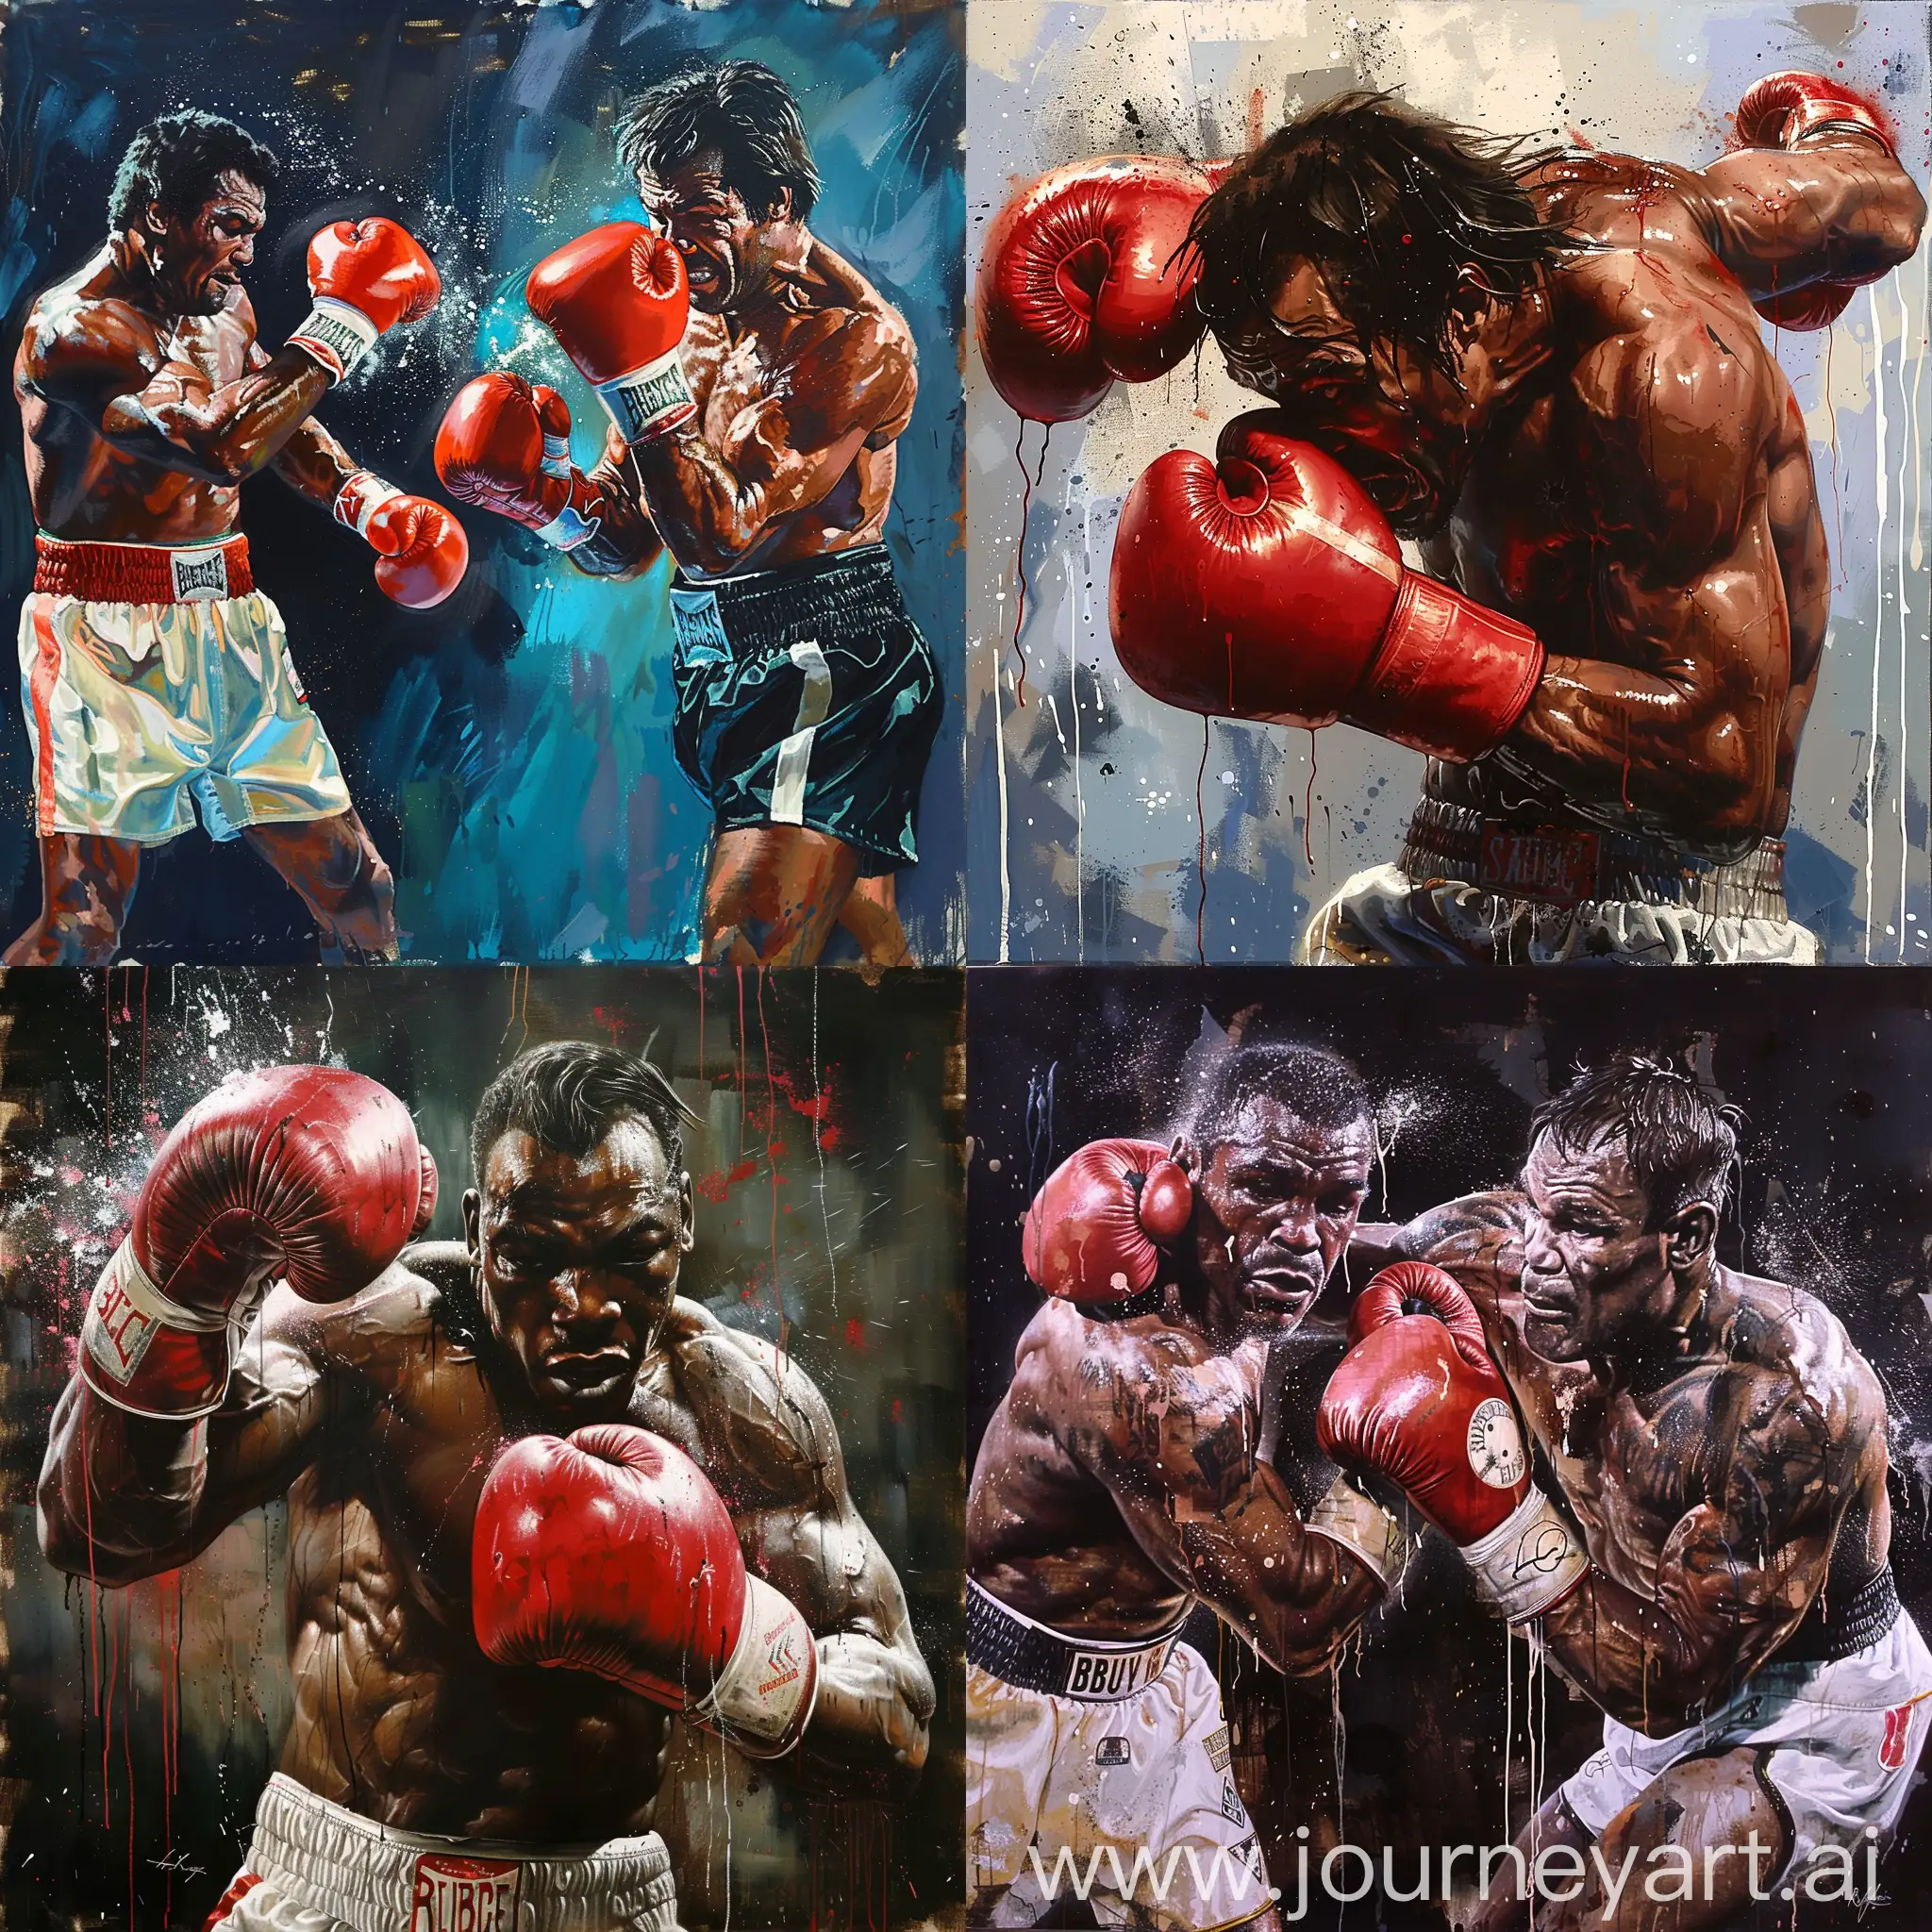 Dynamic-Boxing-Art-Intense-Bout-in-Square-Ring